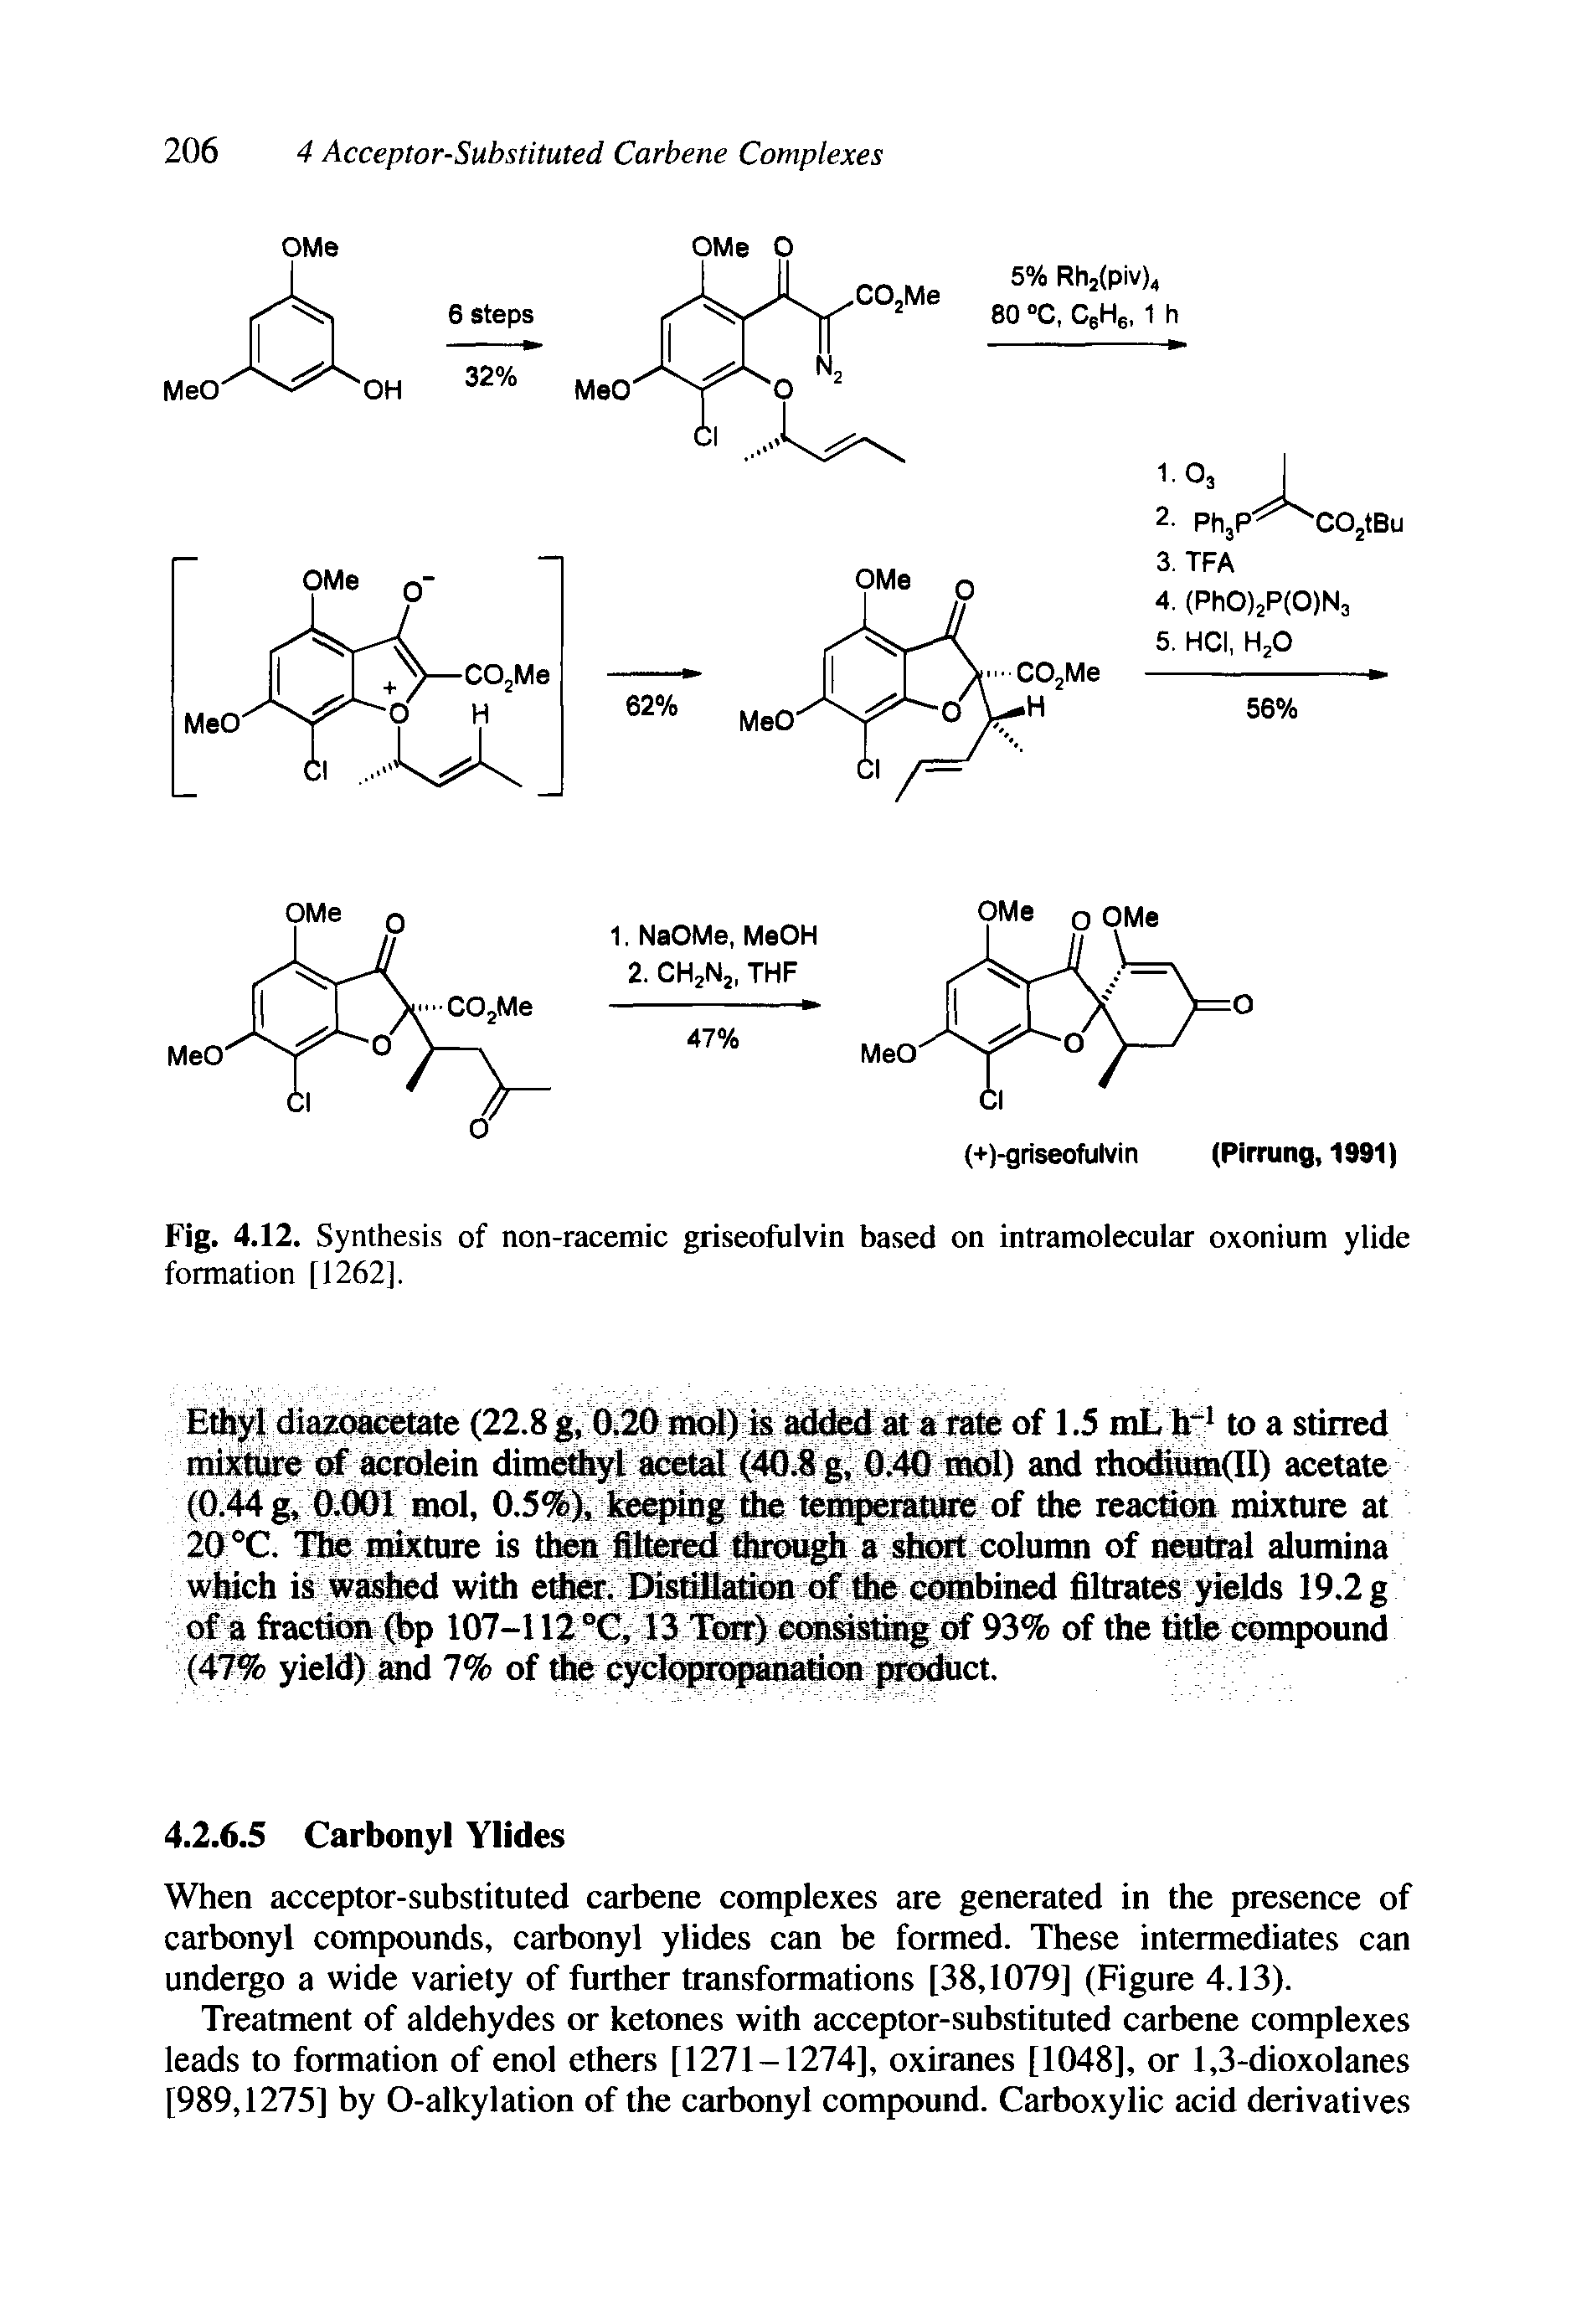 Fig. 4.12. Synthesis of non-racemic griseofulvin based on intramolecular oxonium ylide formation [1262],...